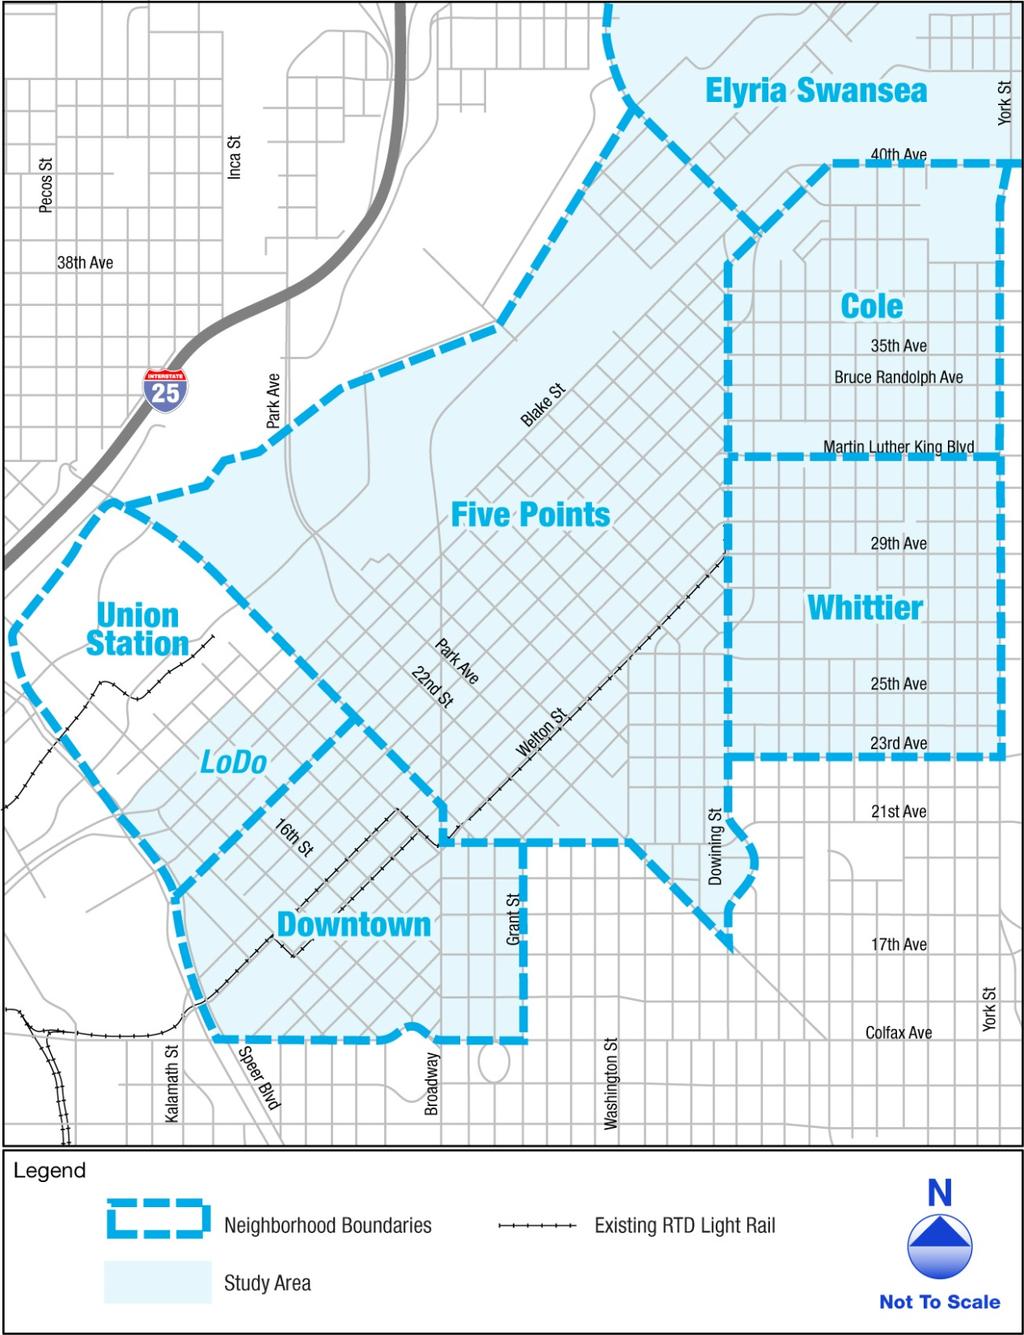 1.2 PROJECT AREA Figure 1-2 shows the project area, which contains established neighborhoods located just north of downtown Denver including